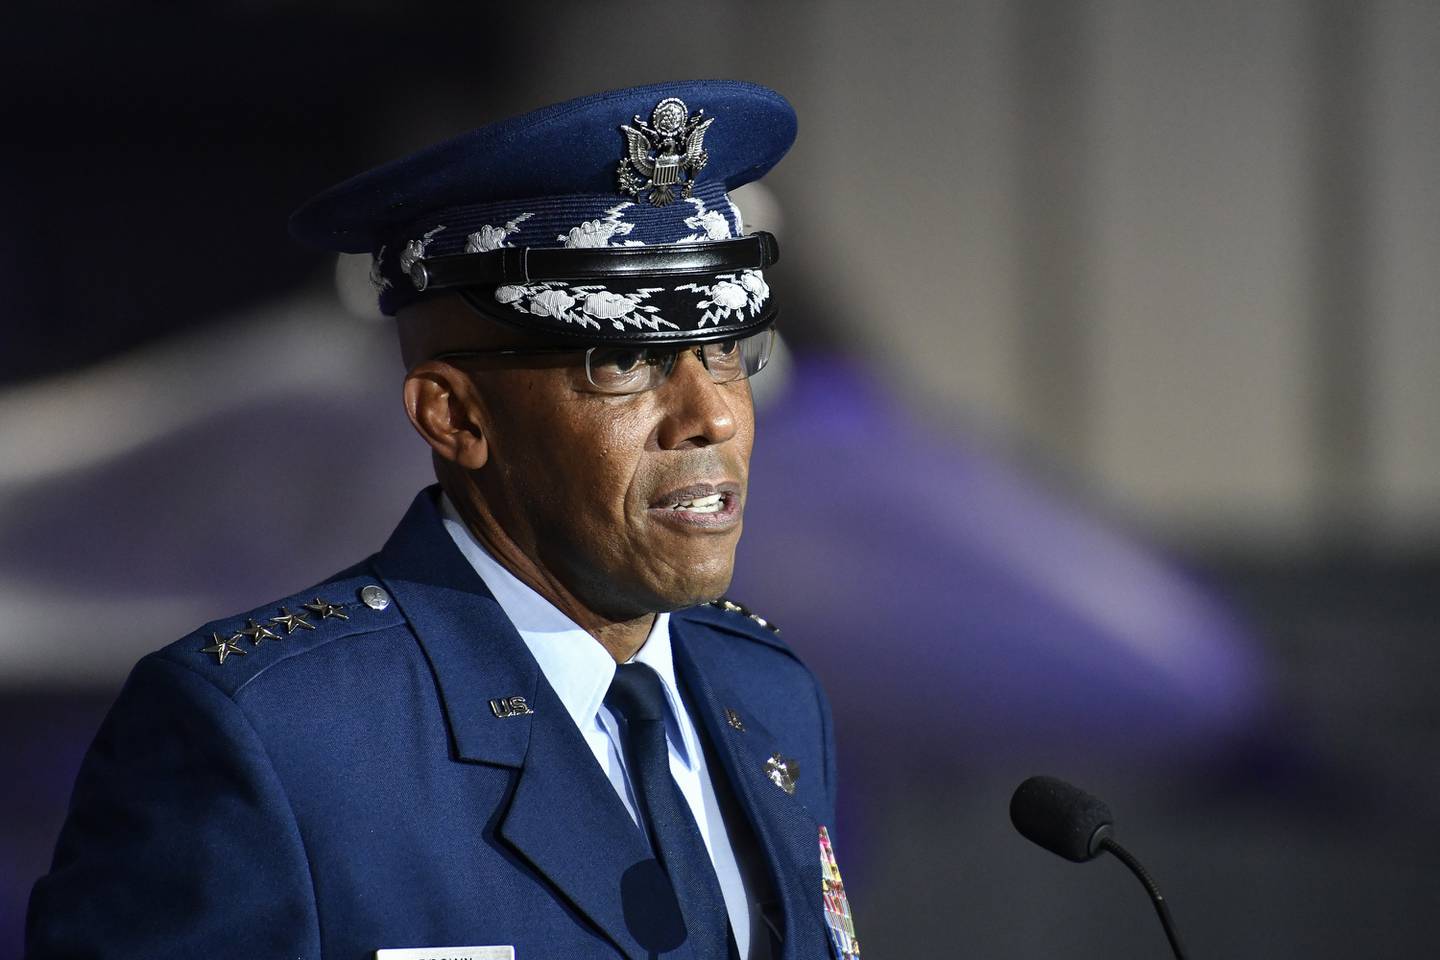 Air Force Chief of Staff Gen. CQ Brown delivers remarks during a transition ceremony at Joint Base Andrews, Md., in 2020. (Eric Dietrich/U.S. Air Force)